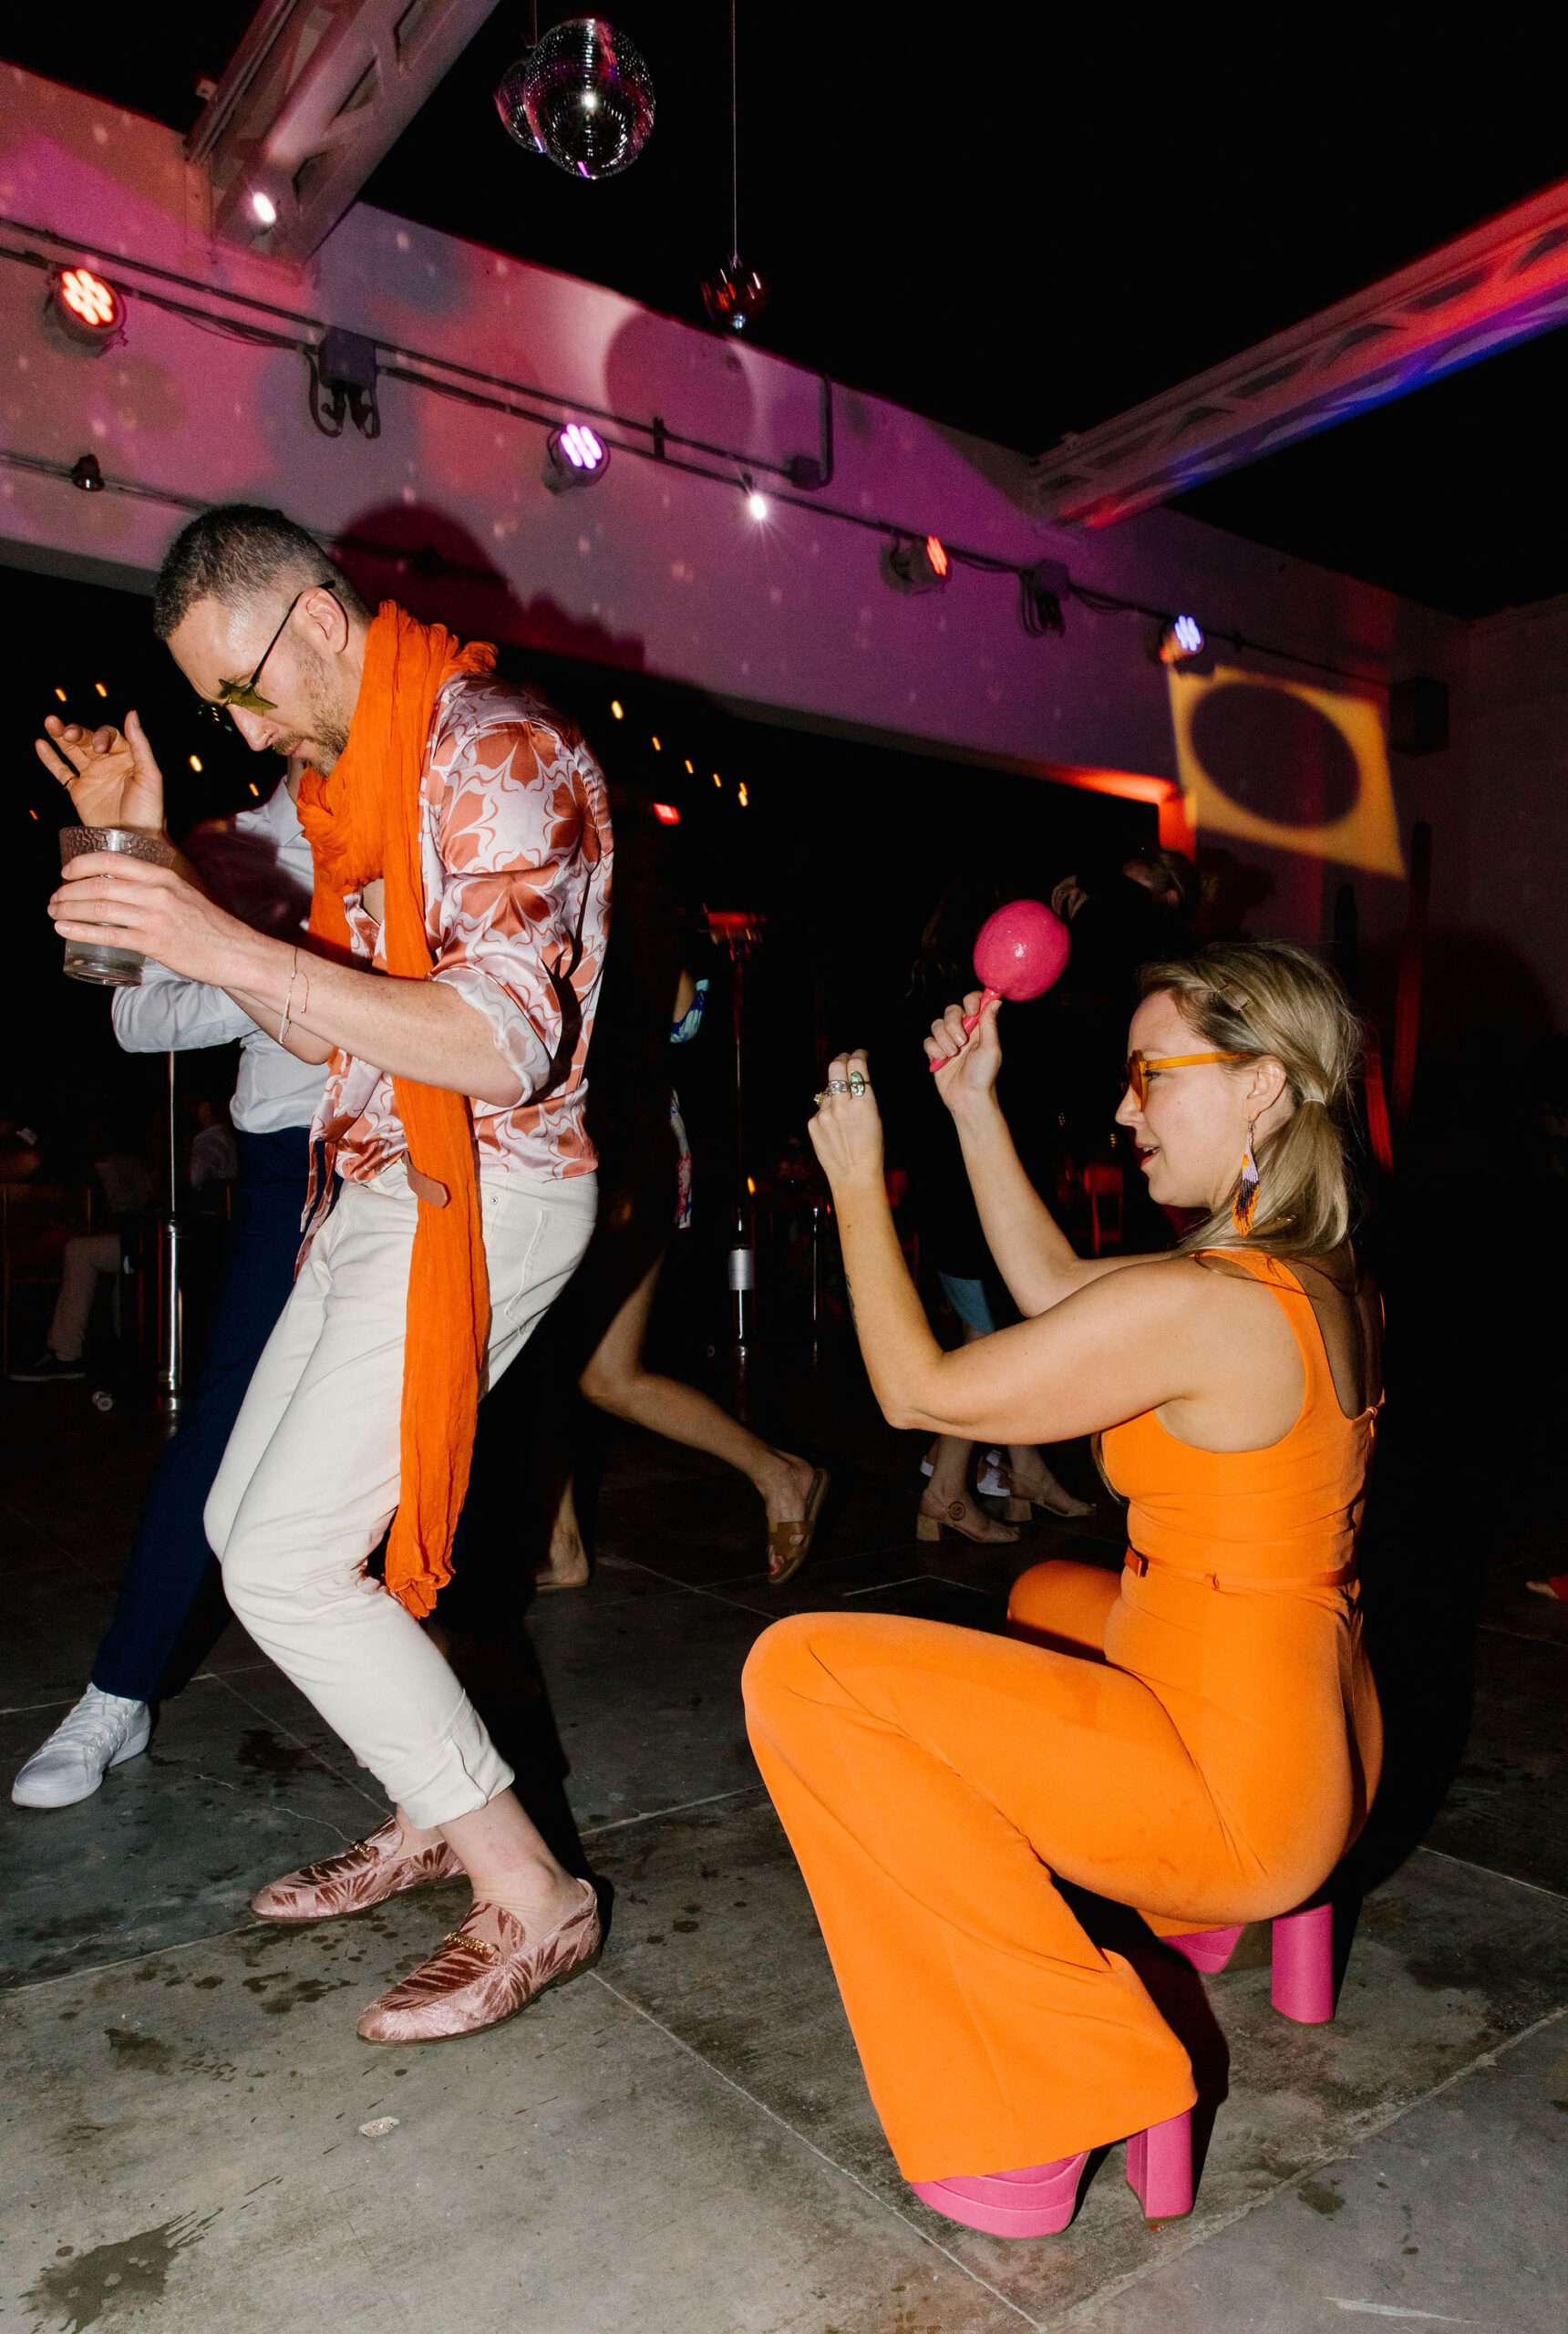 disco ball and hanging blown glass heart ceiling installation wedding dance party moody colorful lighting. colorful wedding guest outfits. orange jumpsuit with chunky fuchsia heels. velvet pink boat shoes